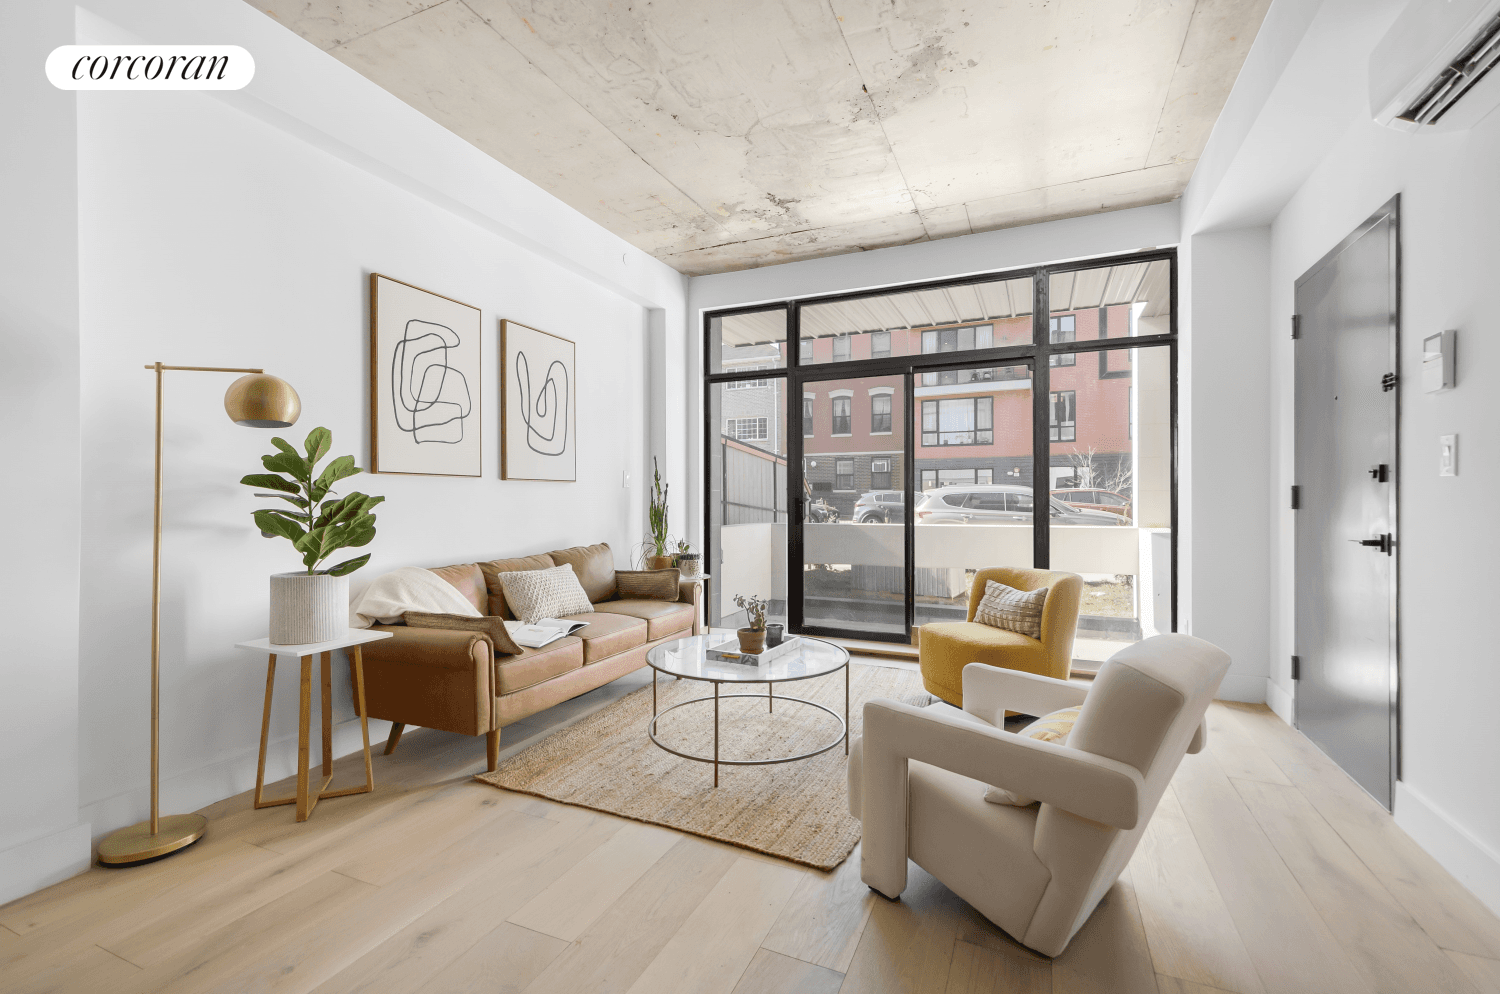 Beautiful duplex condo home with a private garden and flexible layout on the street that separates Bedstuy from Clinton Hill, Brooklyn.